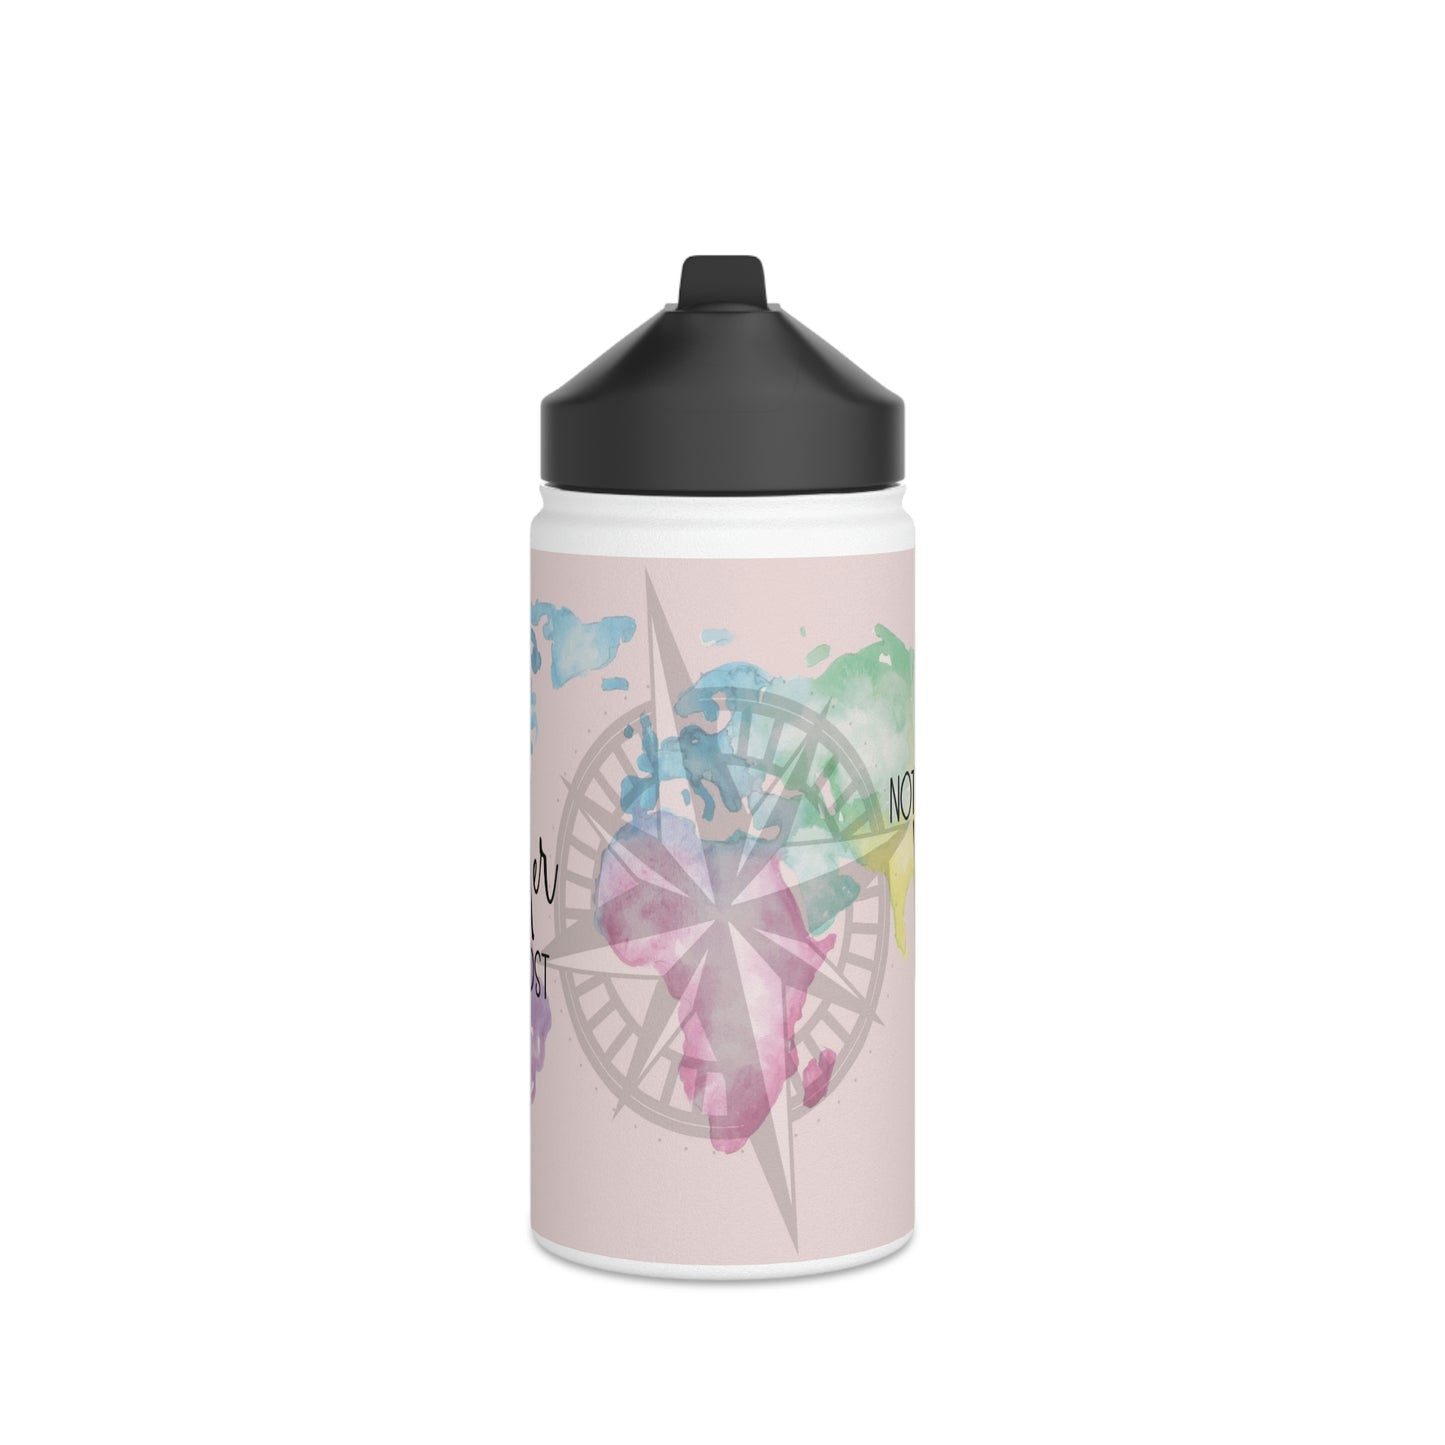 Not All Who Wander Are Lost - POD Stainless Steel Water Bottle, Standard Lid